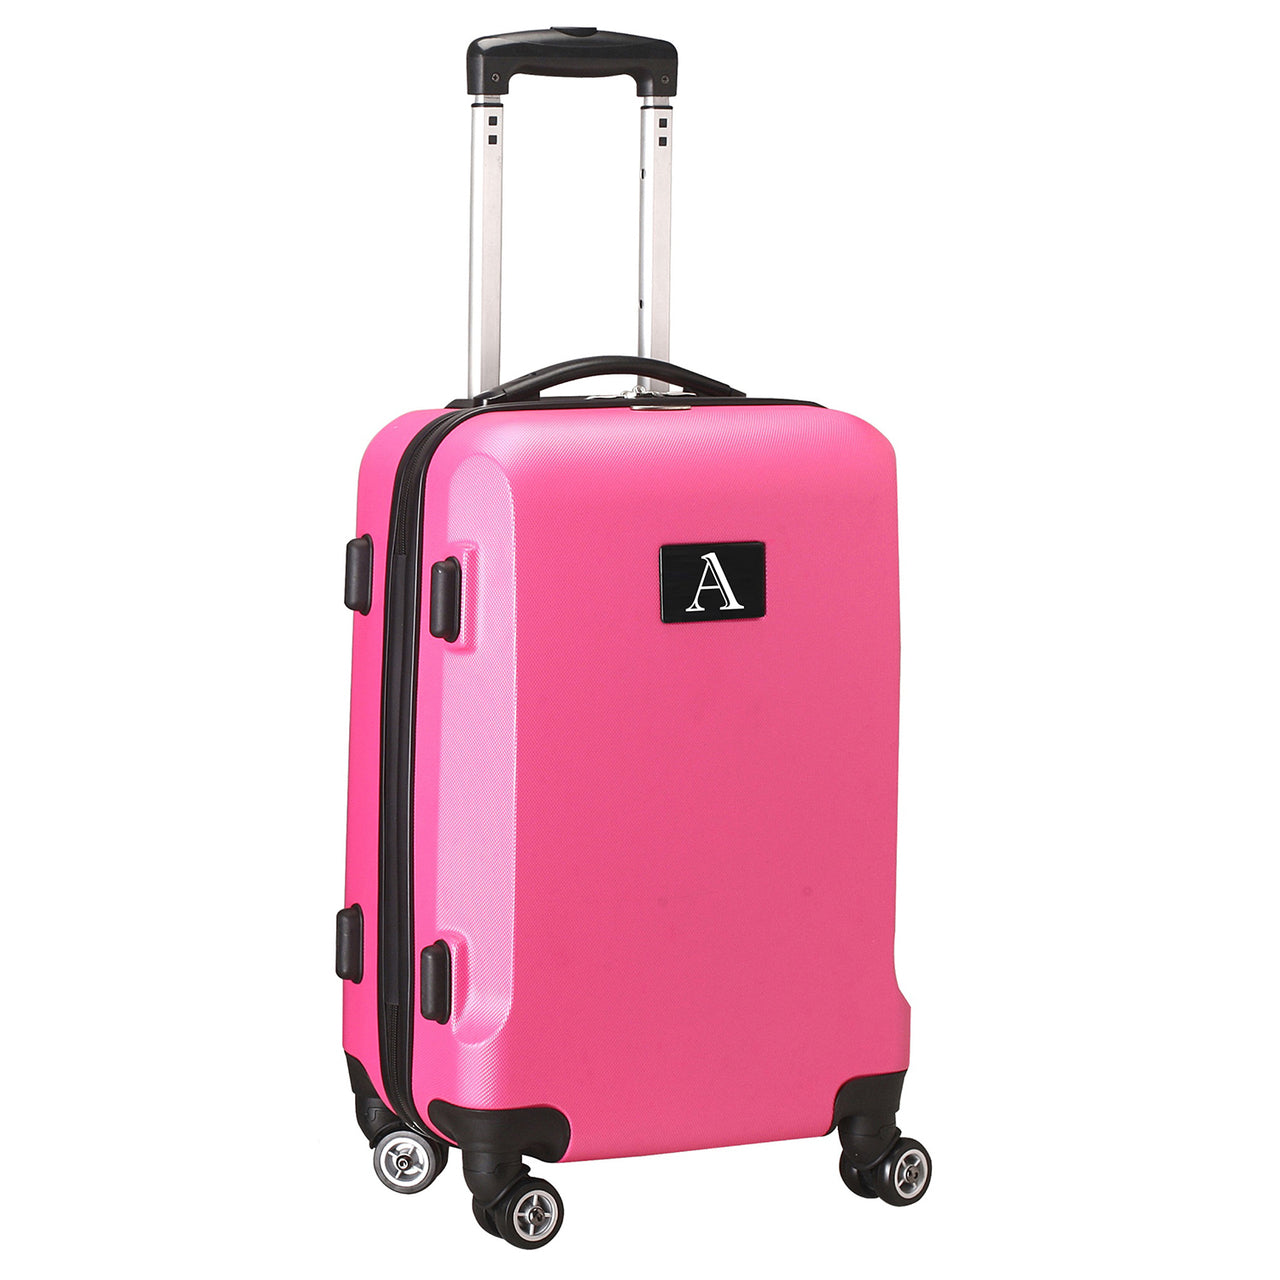 Personalized Initial Name letter "A" 20 inches Carry on Hardcase Spinner Luggage by Mojo in PINK